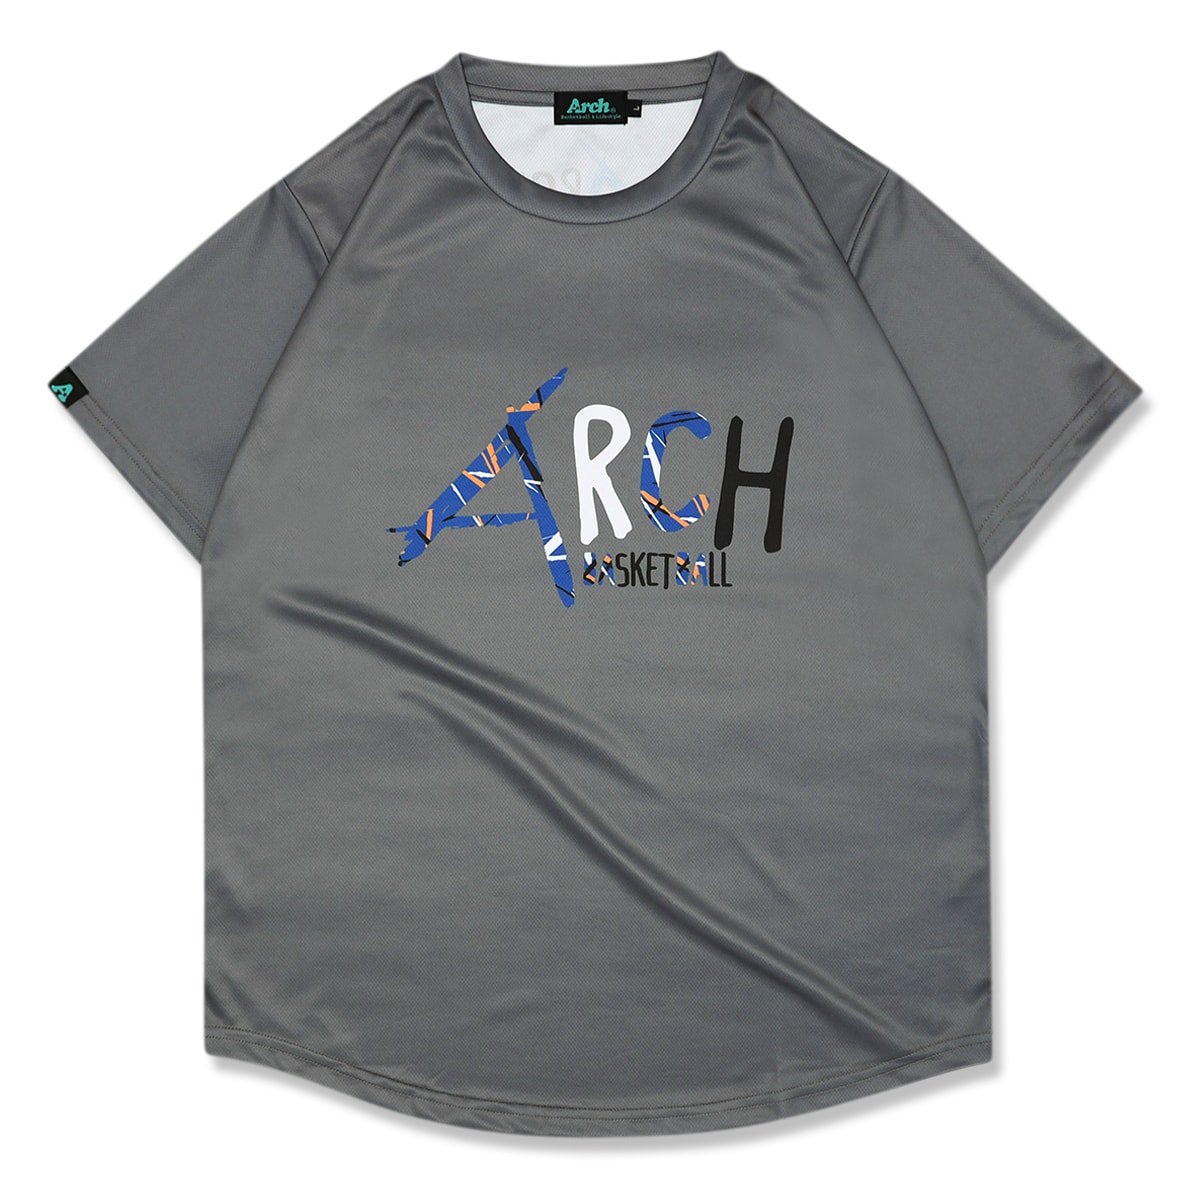 scratched tee [DRY]dark gray